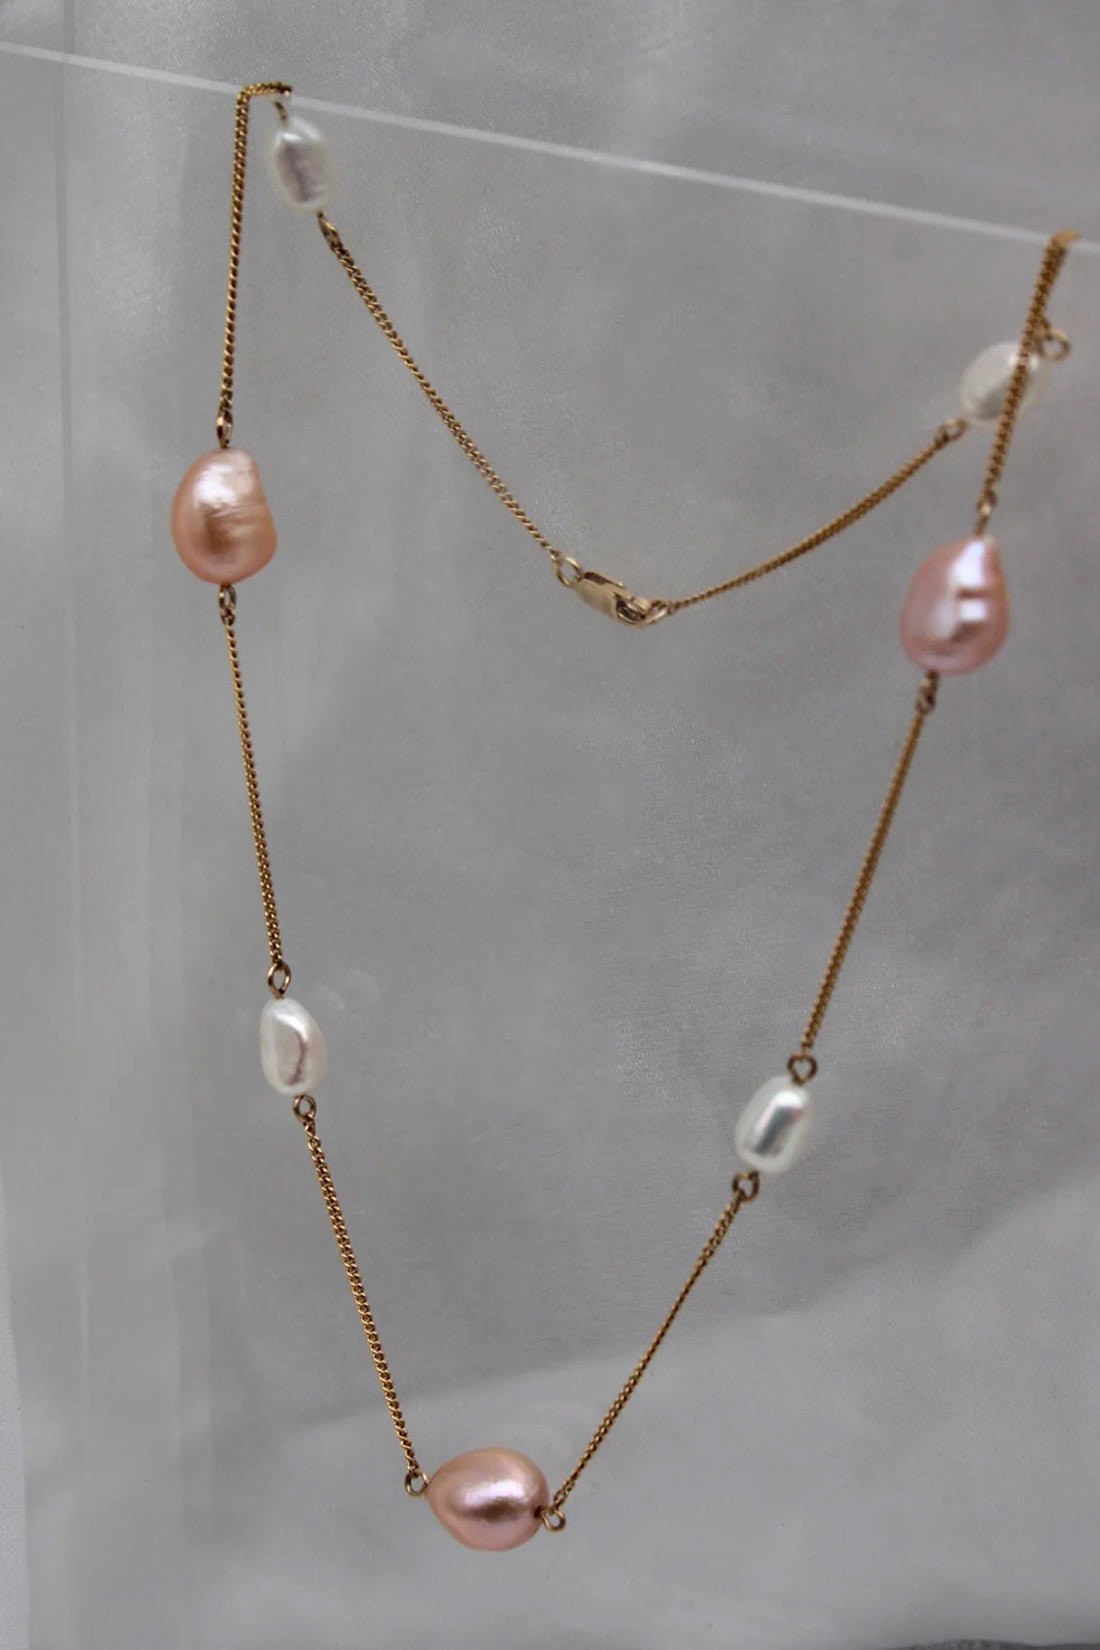 Sadie Jo Jewelry Co. Mixed Pearl Necklace on Gold Fill Chain